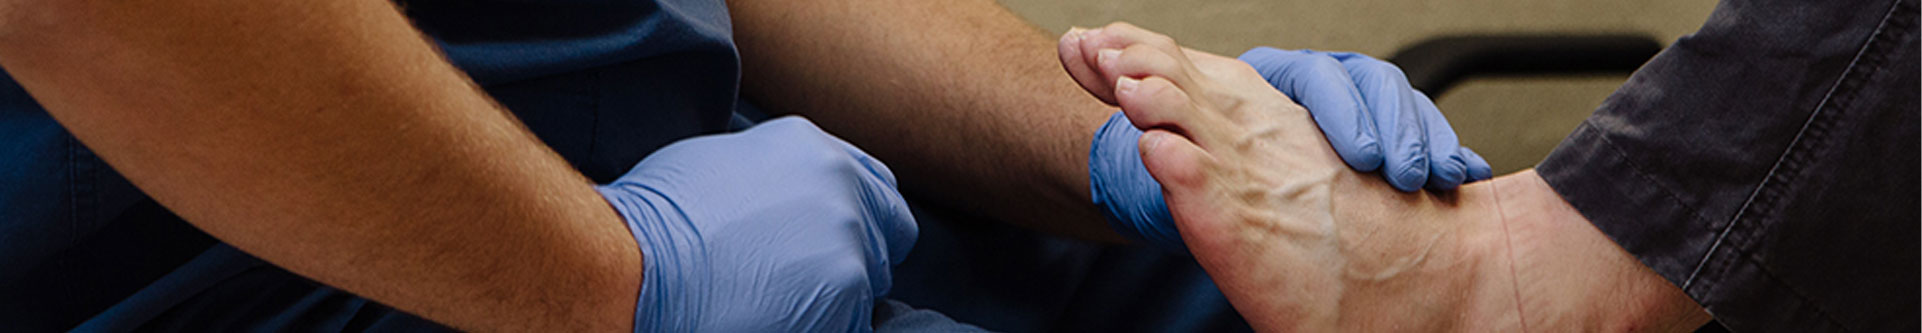 Banner picture of a male Nurse holding a patients bare foot on his lap. He is wearing gloves.